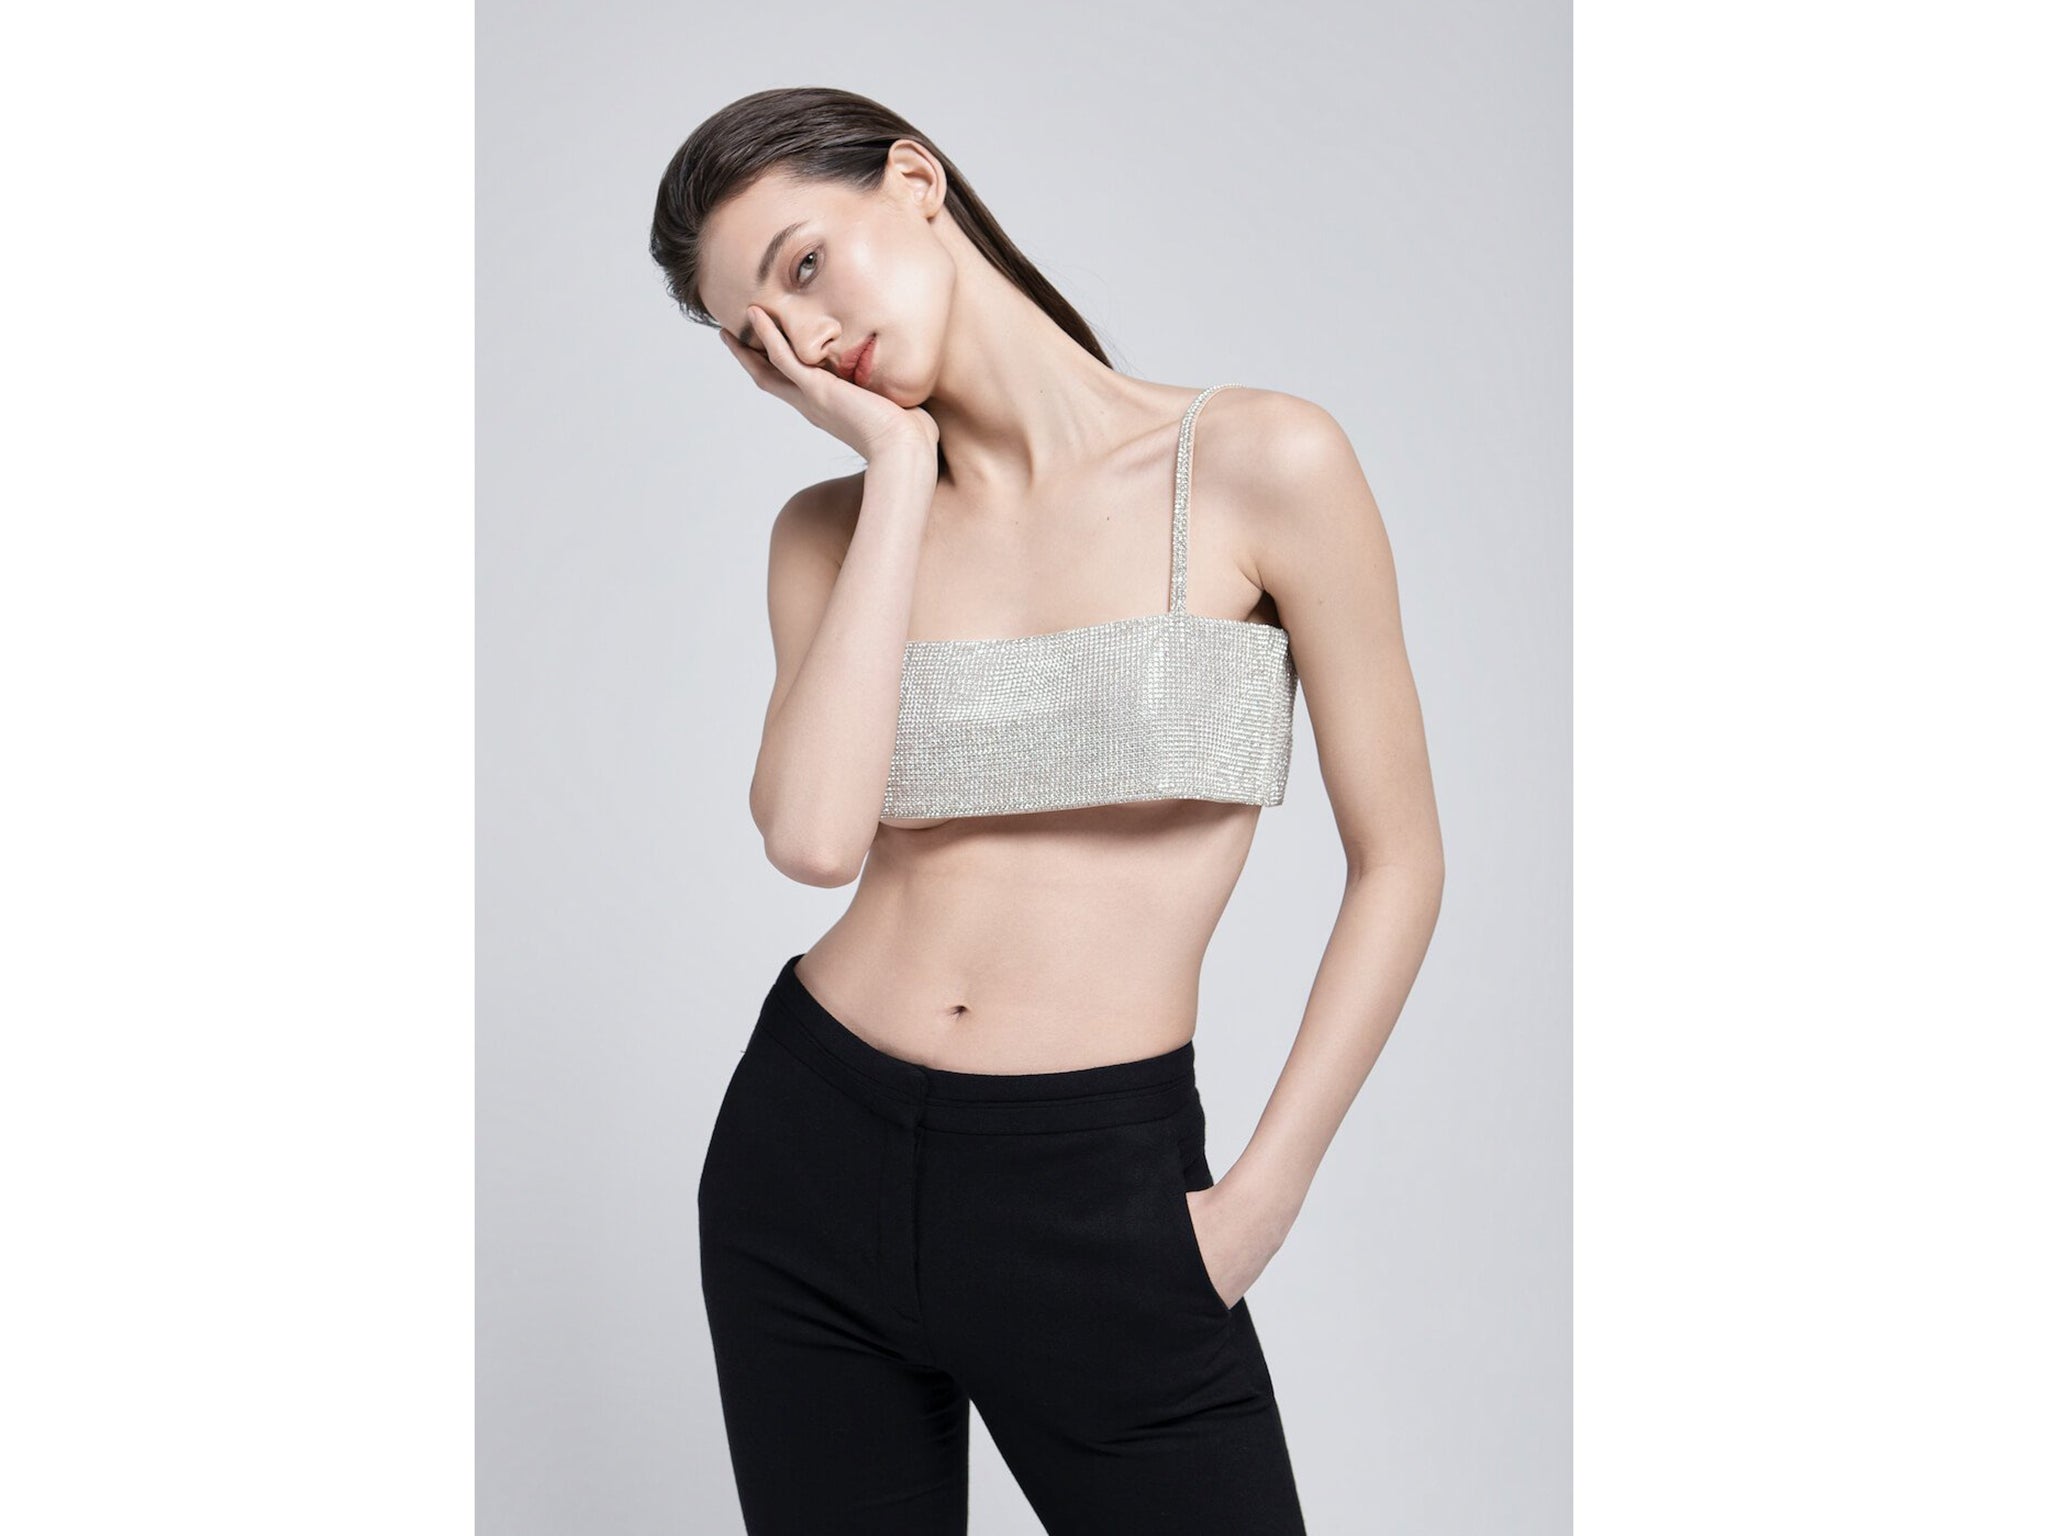 Zara's sell-out sequin crop top: Dupes for the bralette | The